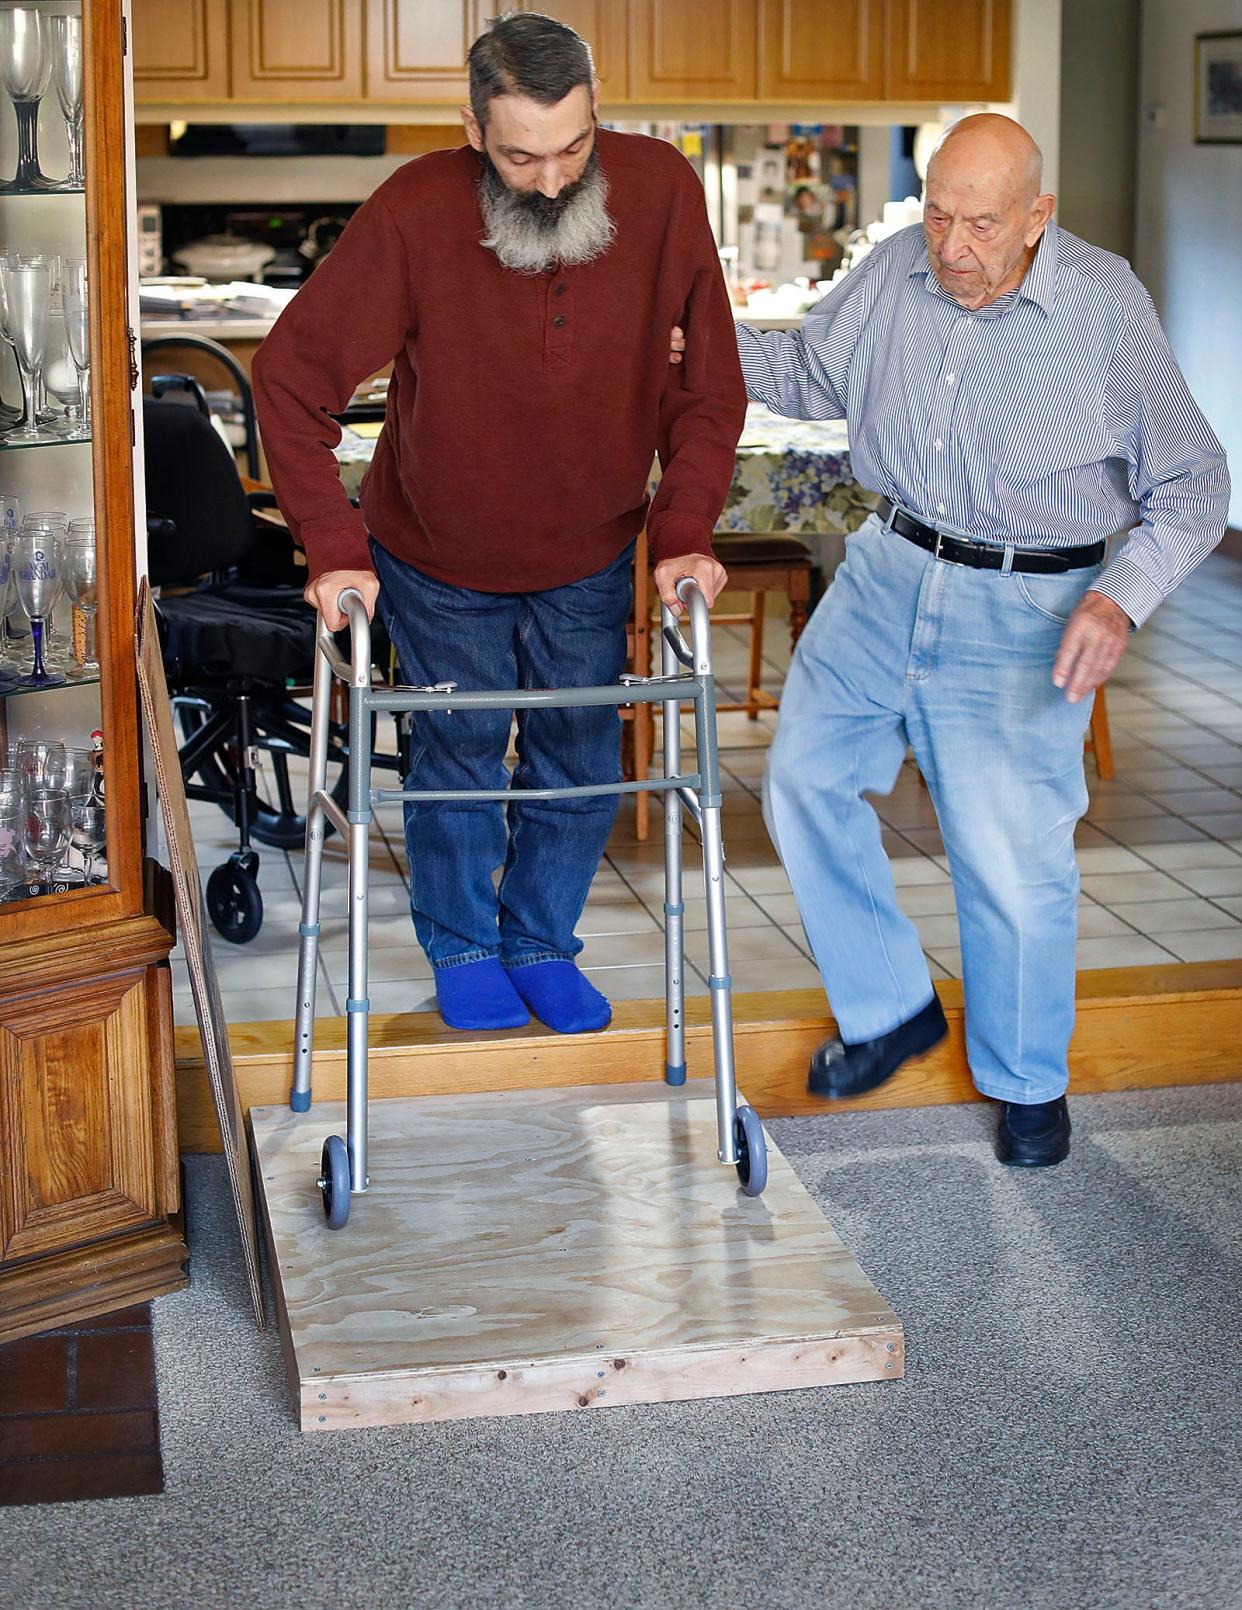 Carmine "Charlie" Mazzulli, 95, right, assists his son, Bob, 53, who suffered a spinal cord injury 10 years ago.